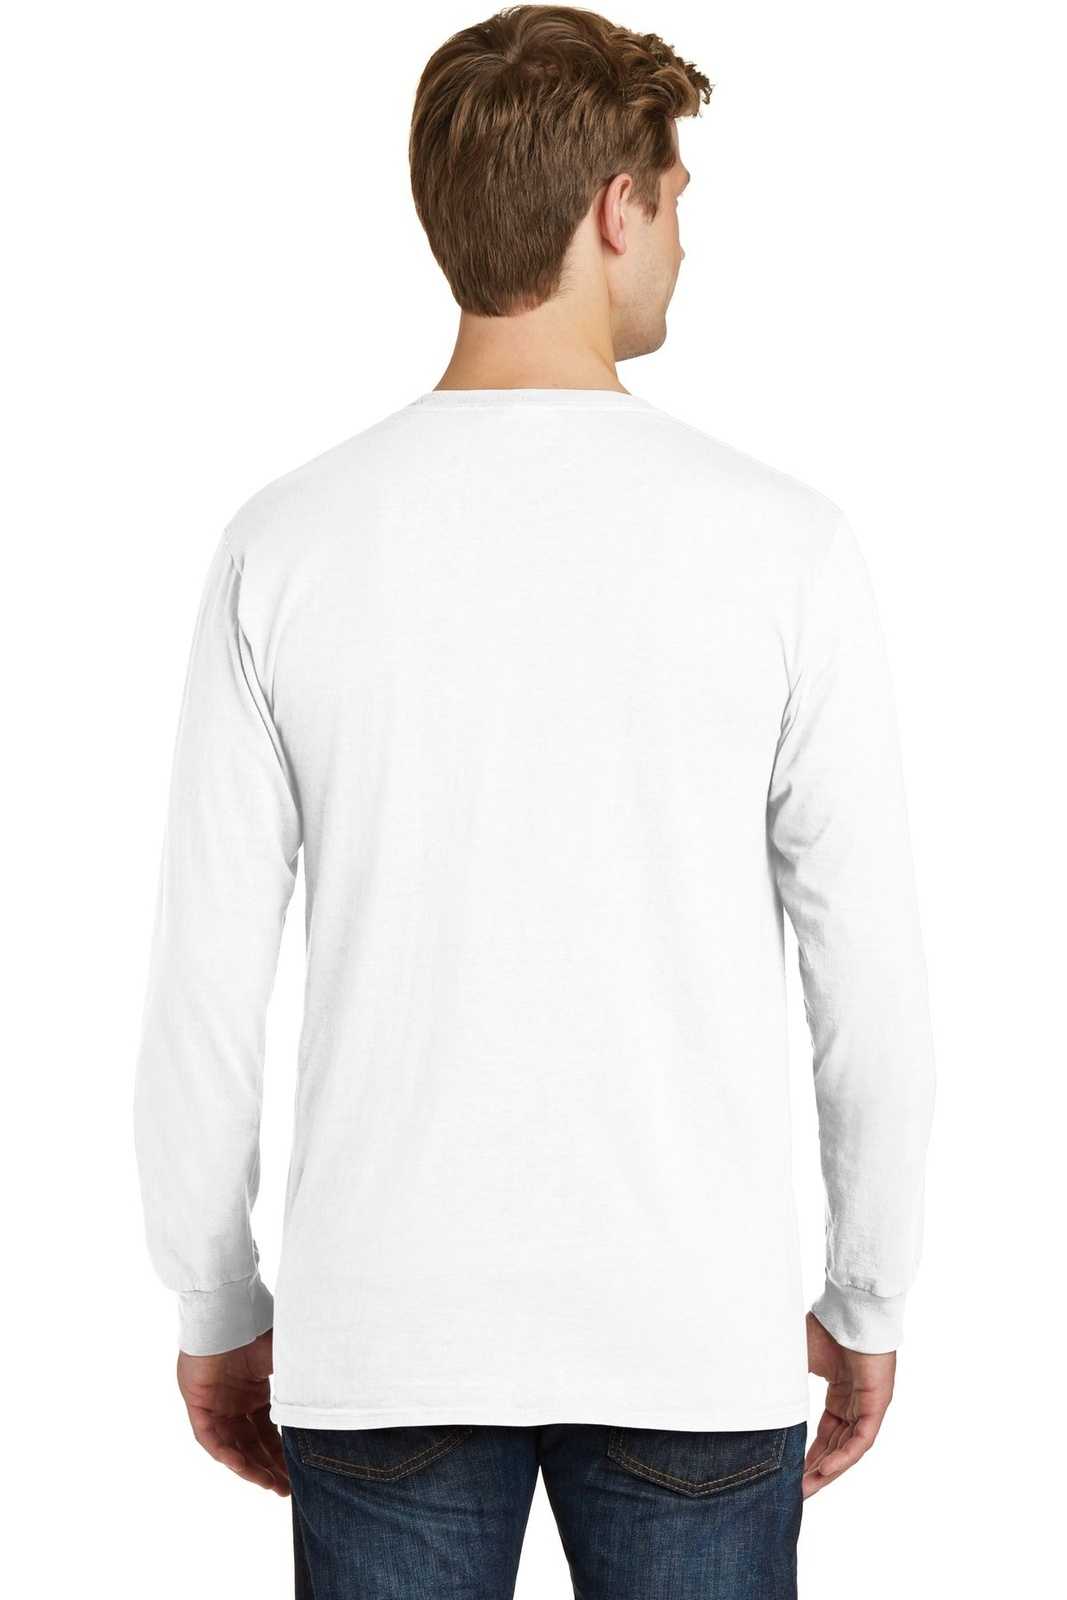 Port & Company PC099LS Beach Wash Garment-Dyed Long Sleeve Tee - White - HIT a Double - 1